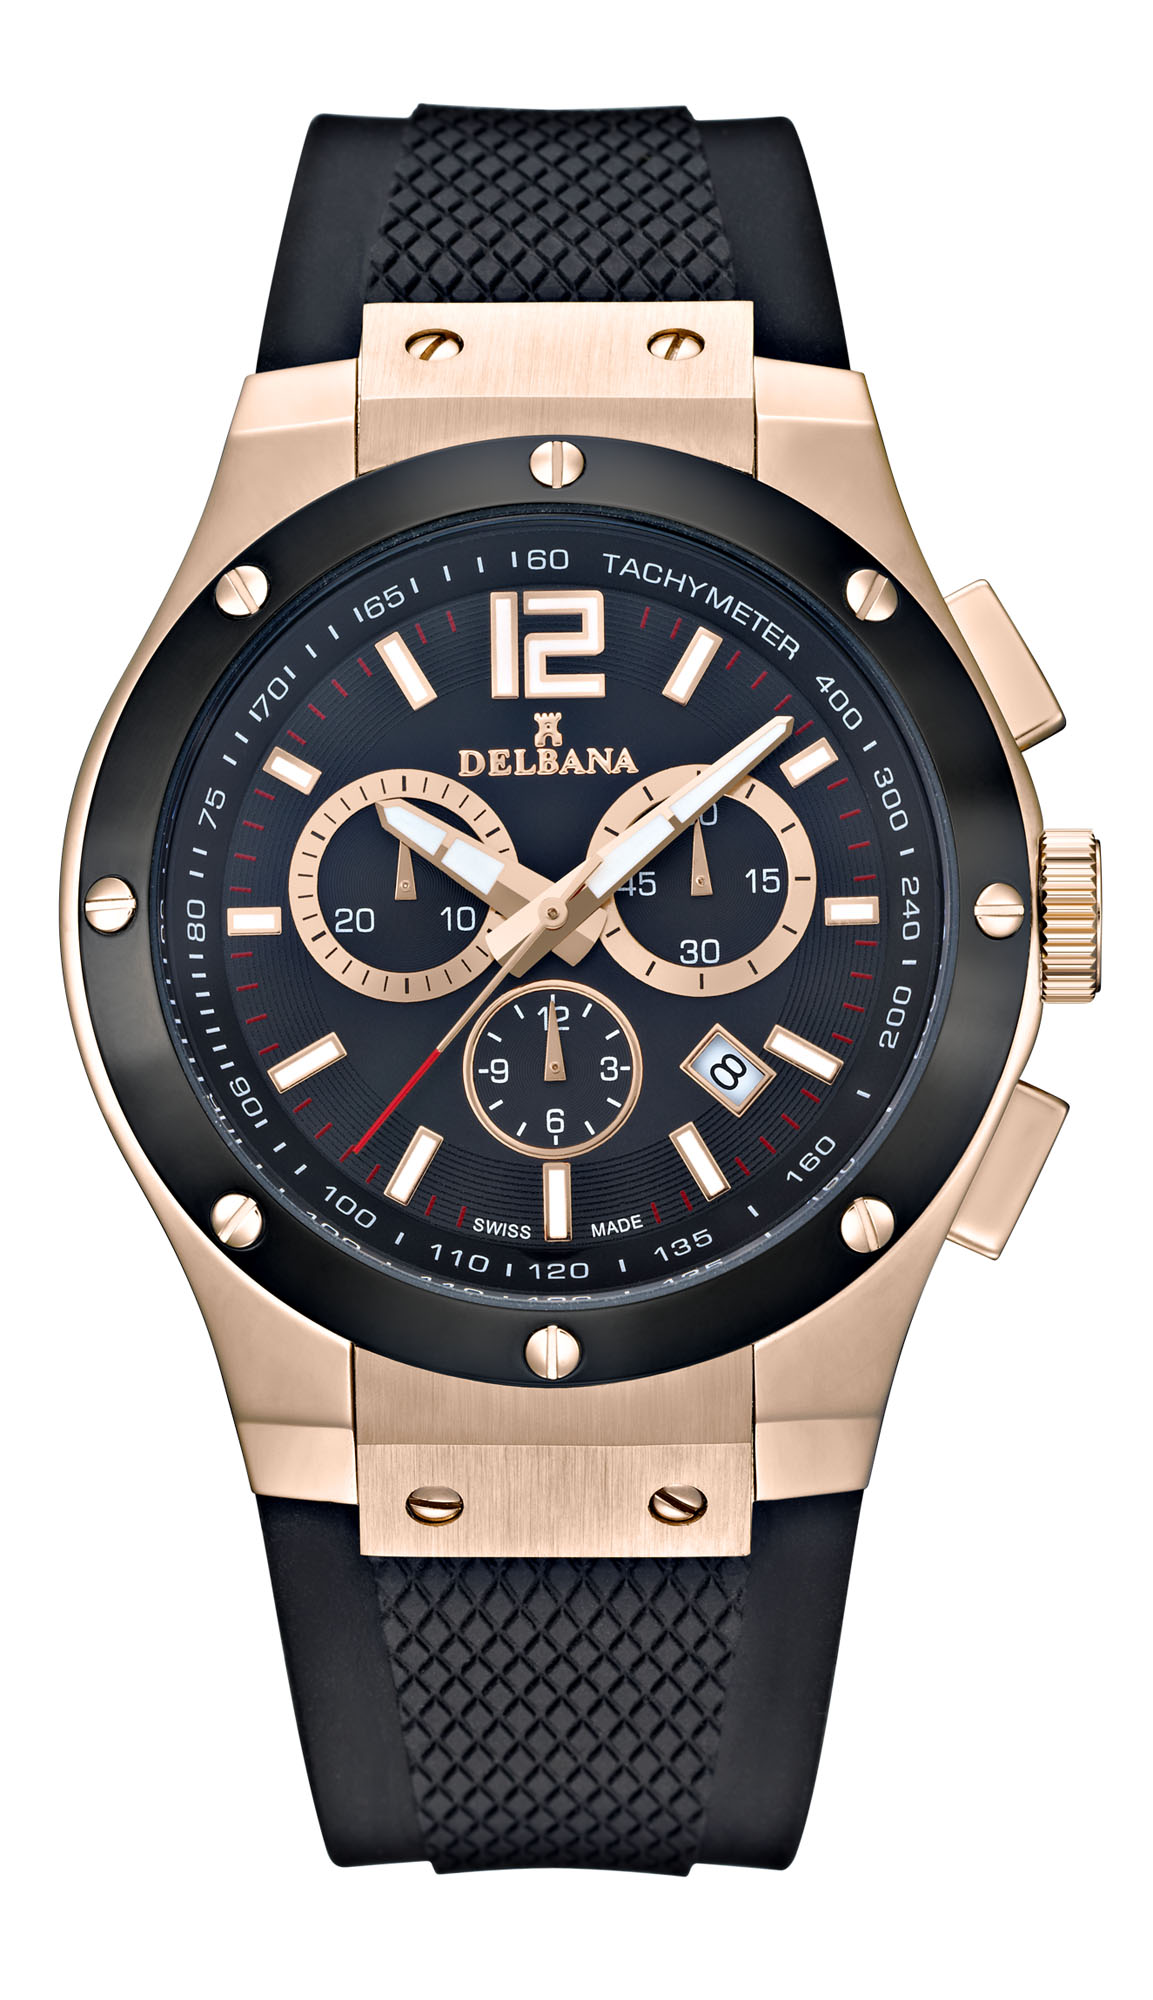 Delbana Manhattan. Men's sports Chronograph with Tachymeter and date.